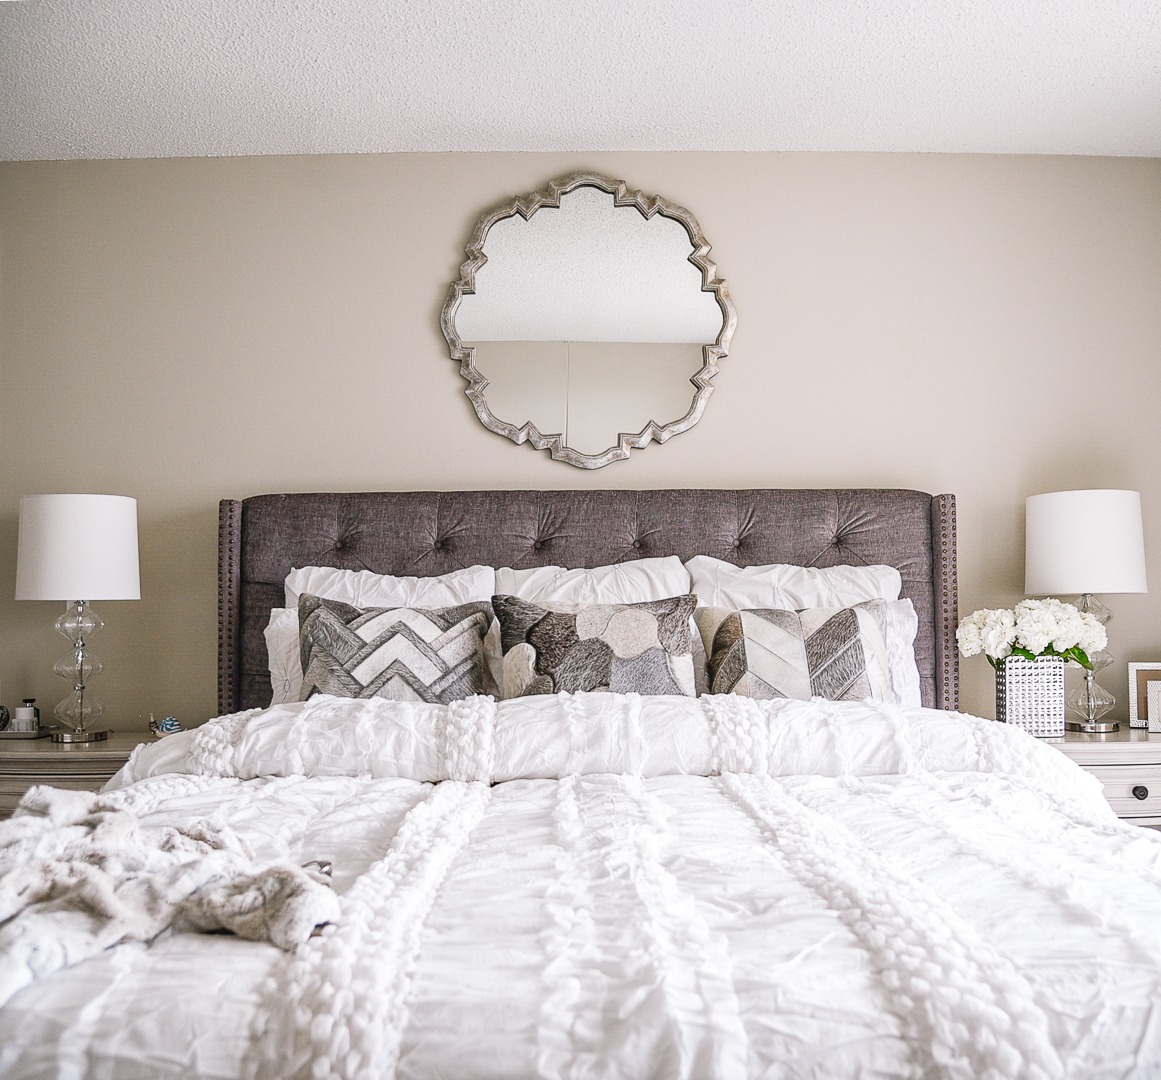 White Georgette quilt from Home Decorators. - Our Master Bedroom Linen Refresh with Home Decorators by Chicago style blogger Visions of Vogue